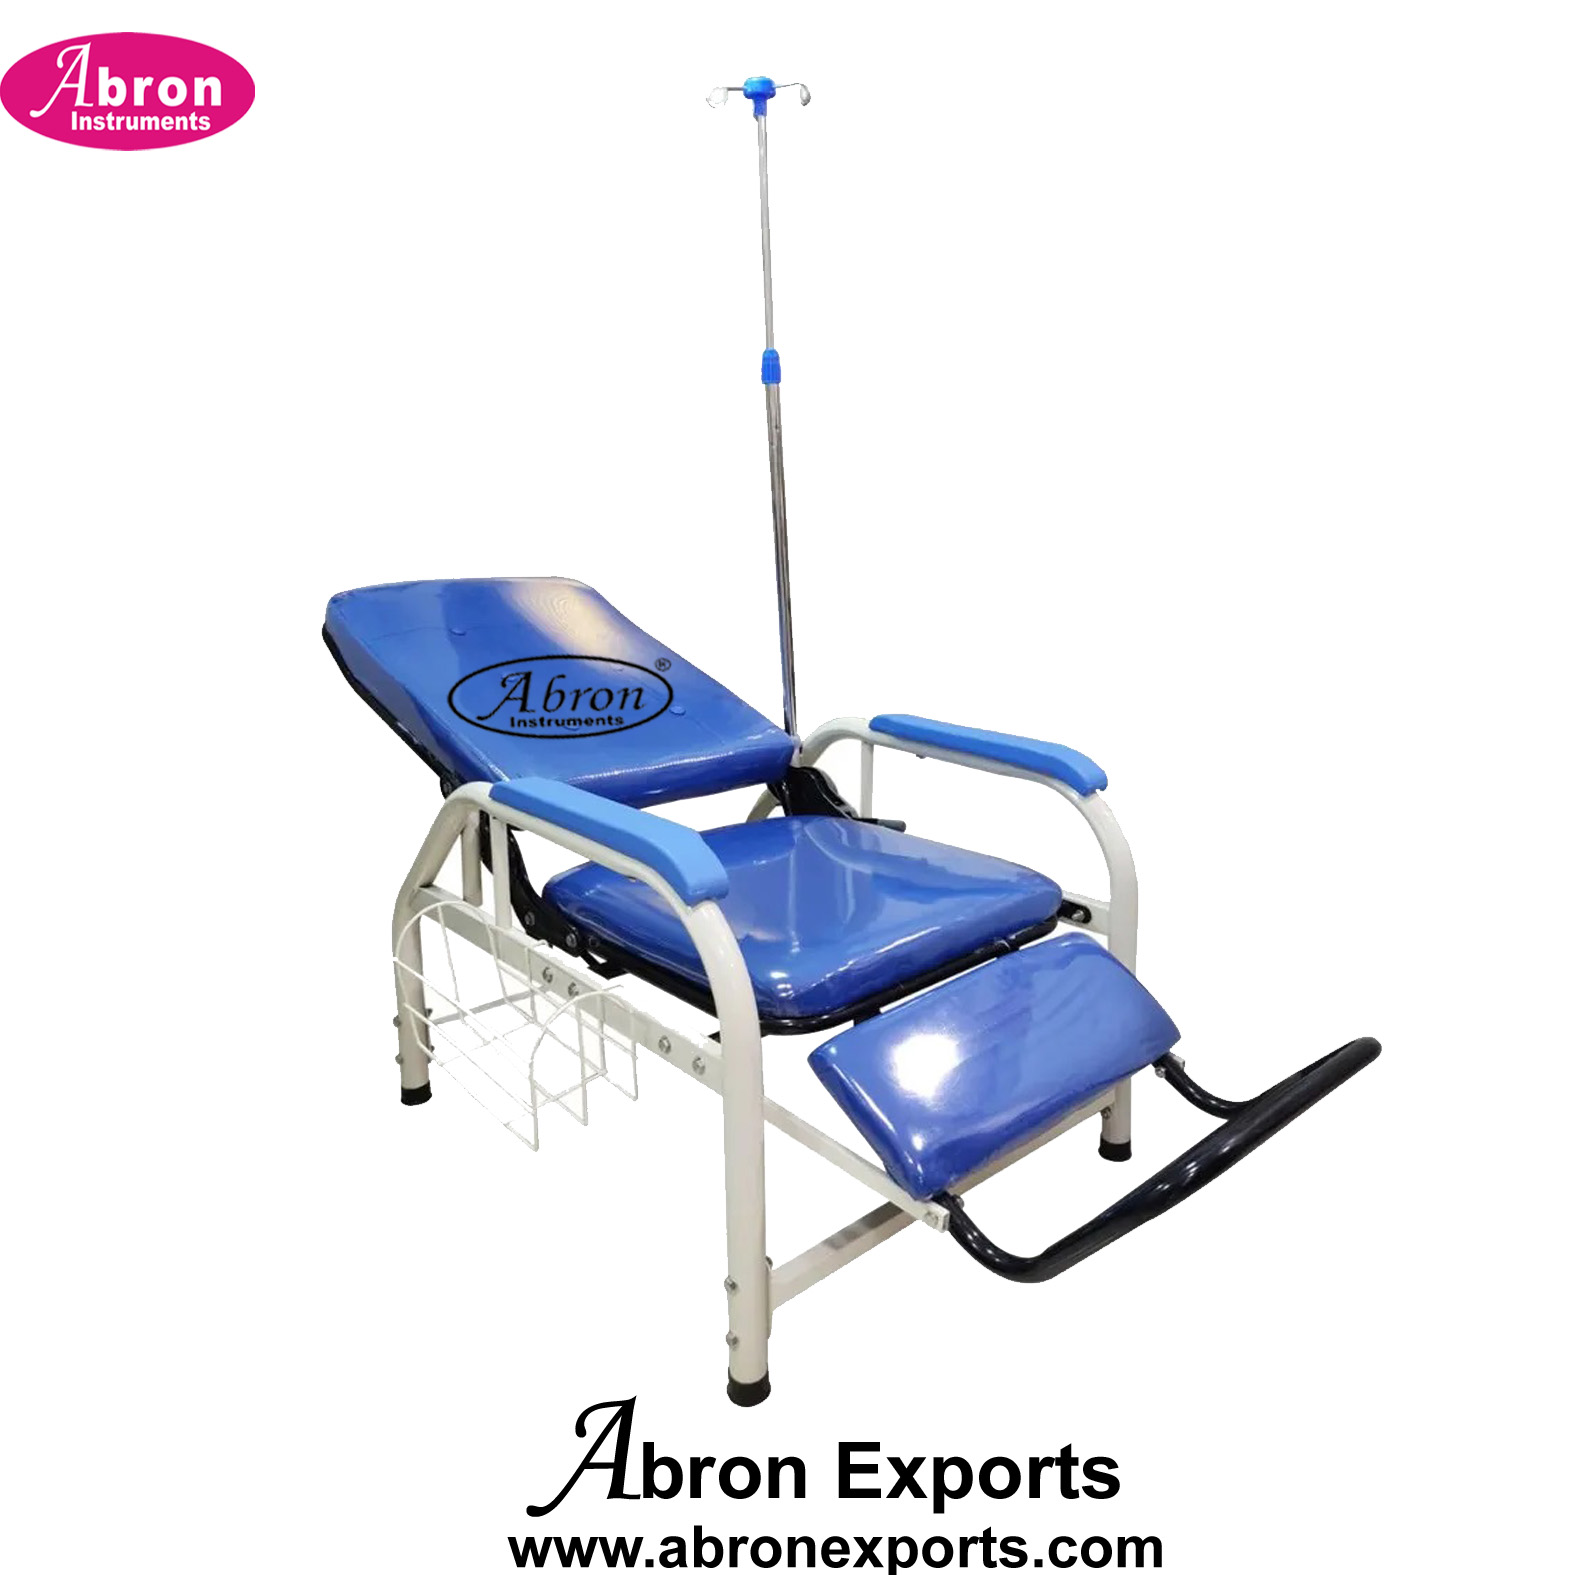 Hospital Manual Blood Donor Chair Cum Stretcher Back Adjustable Blood Transfusion Chair With IV Stand Abron ABM-2275BCH3 